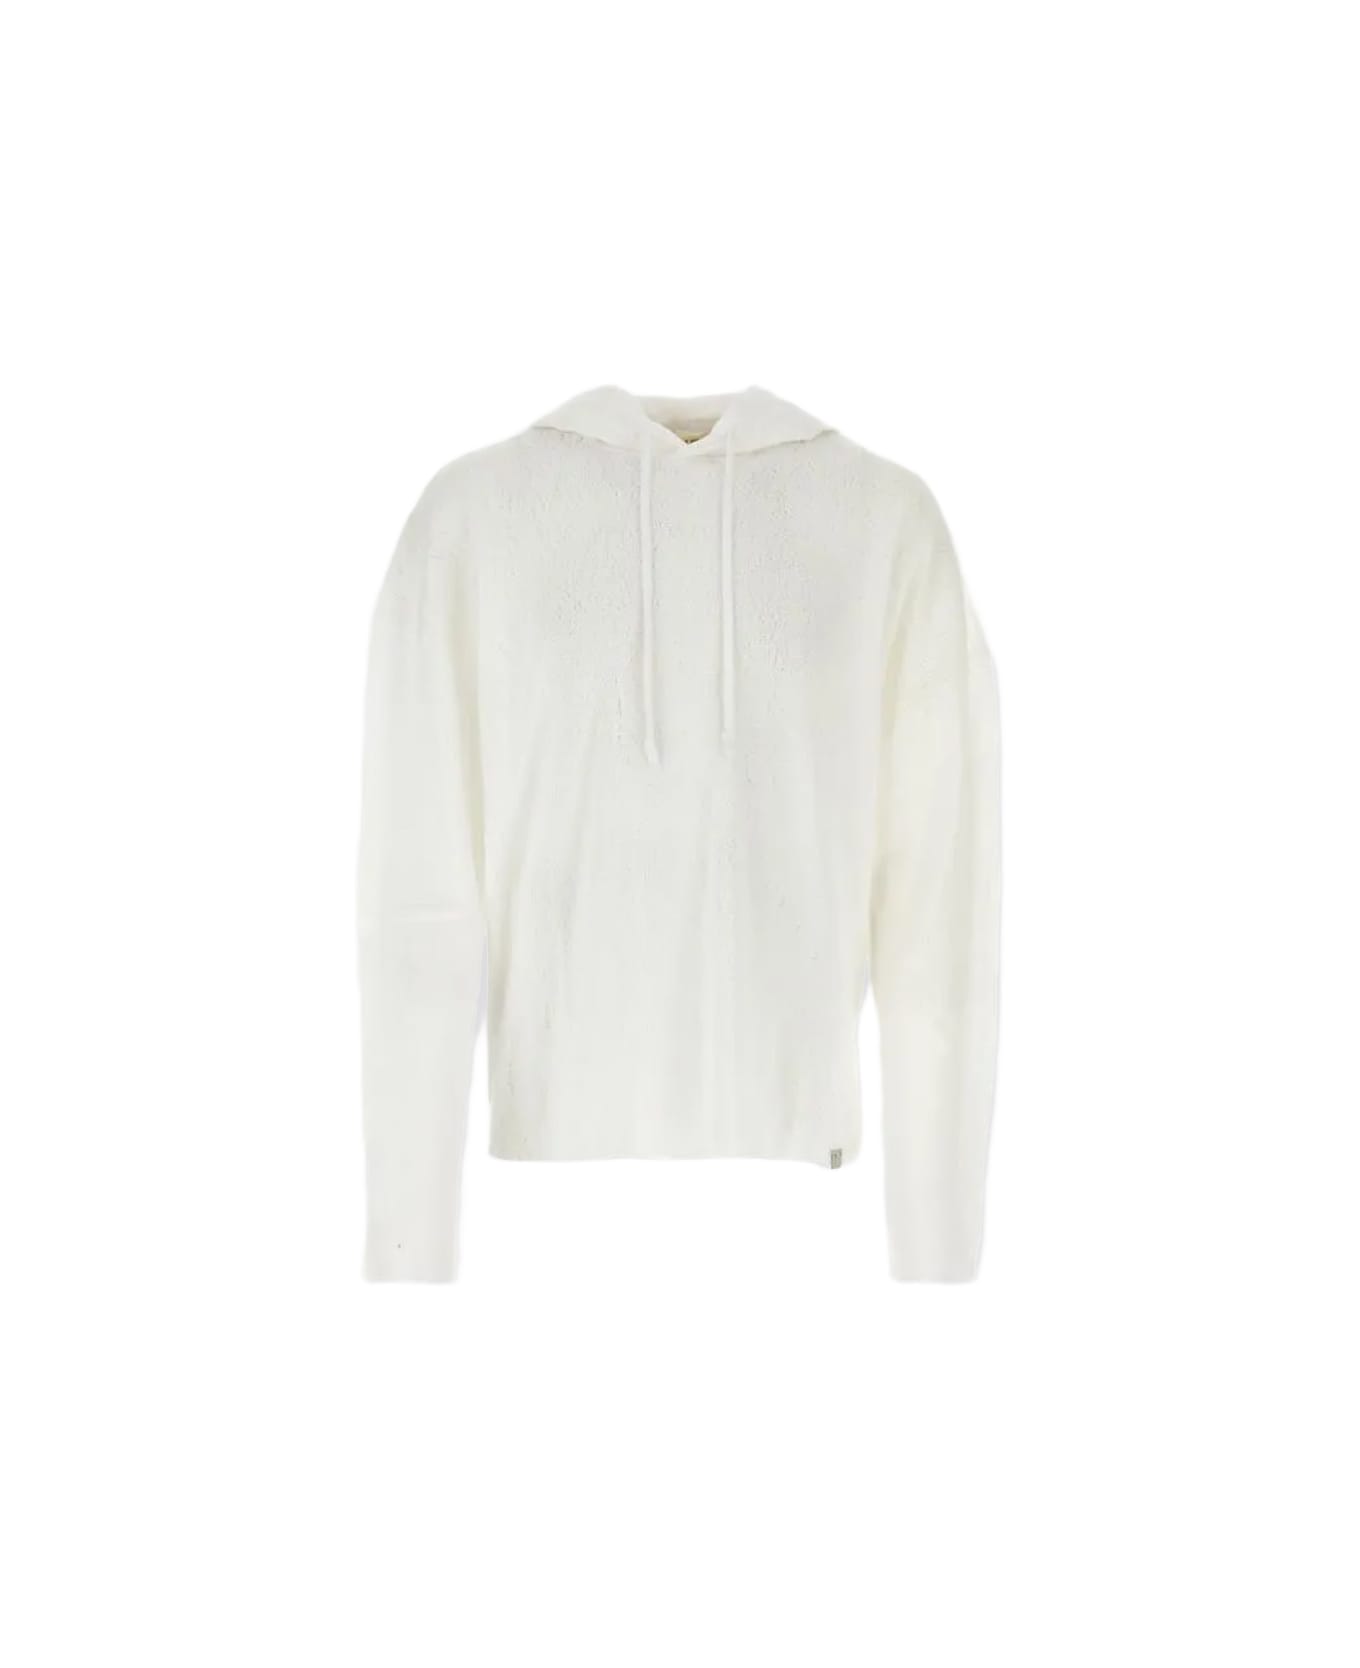 1017 ALYX 9SM Destroyed Hooded Tee Off white destroyed jersey hooded tee - Destroyed hooded tee - Bianco